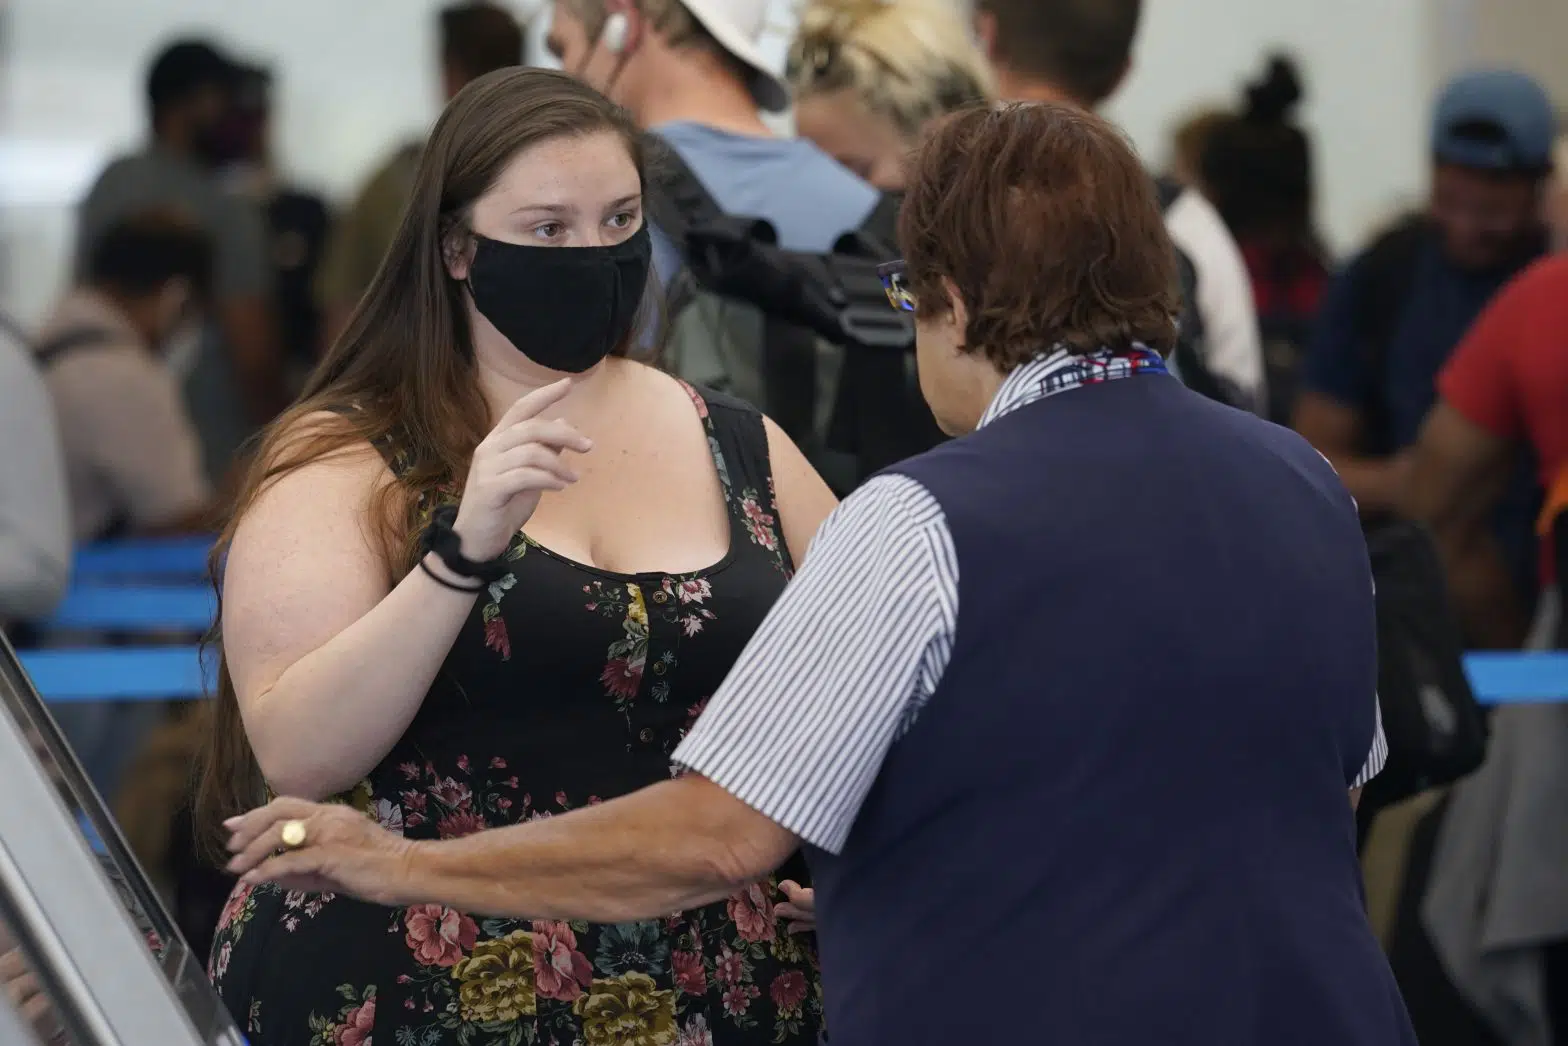 Majority of Americans Want Masks for Travelers: AP-NORC Poll